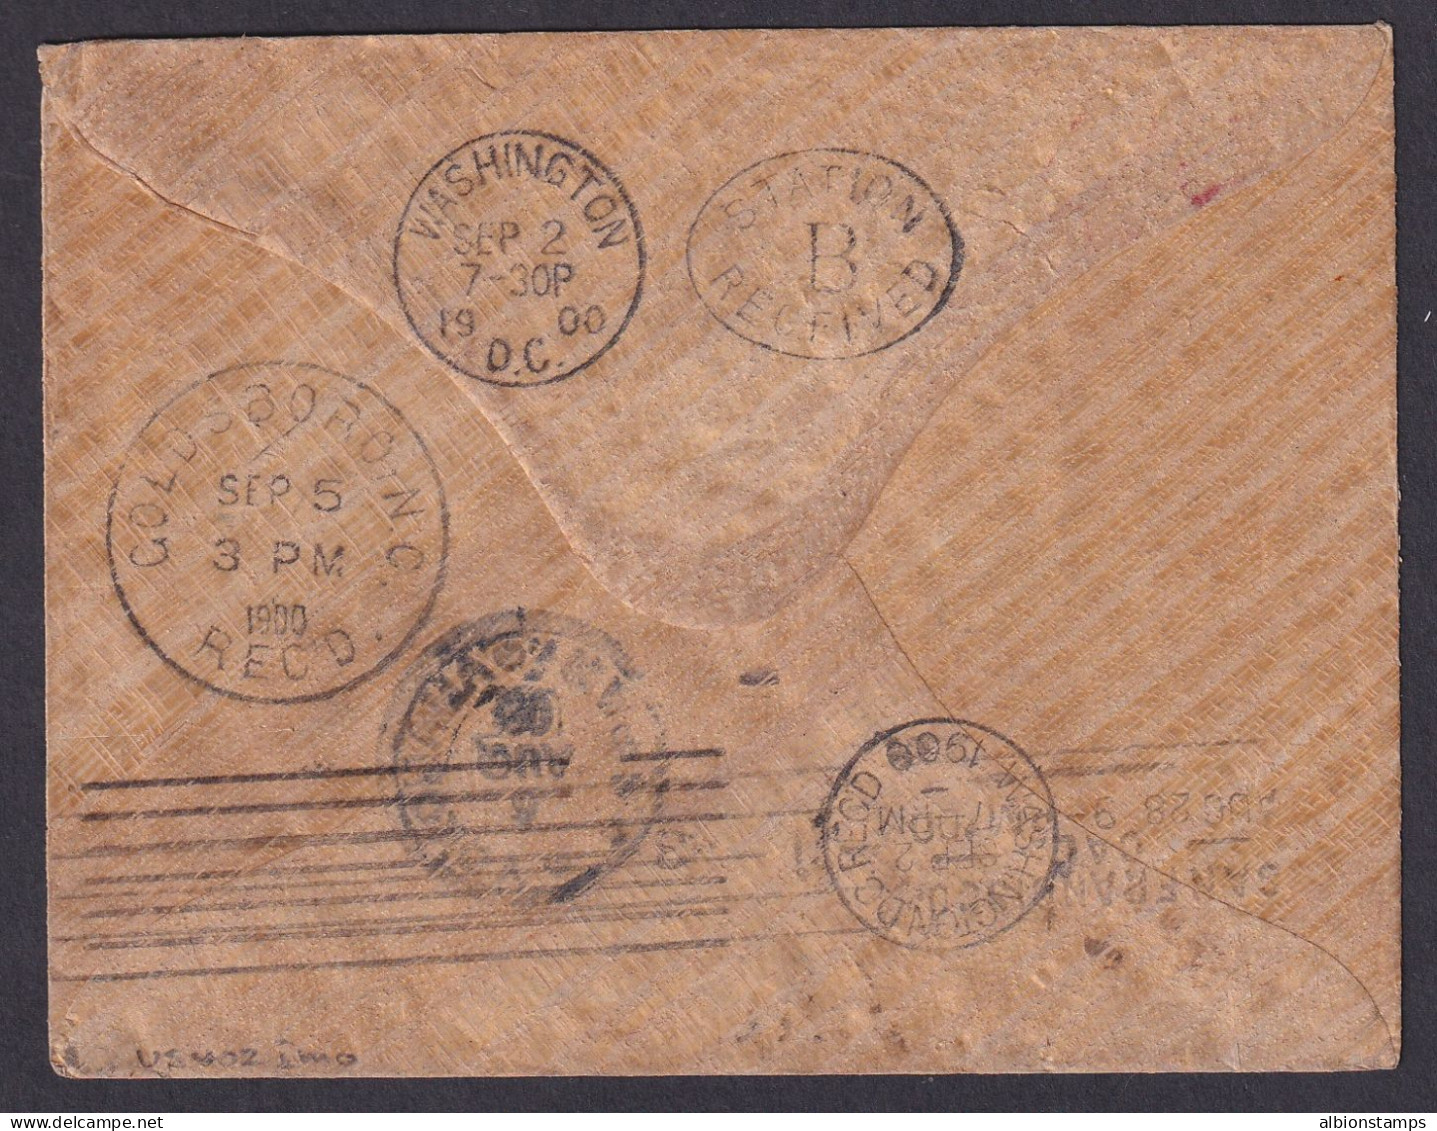 Japan/USA - 1900 Cover From US Ship RELIEF To US Via Nagasaki, Boxer Rebellion - Poststempel